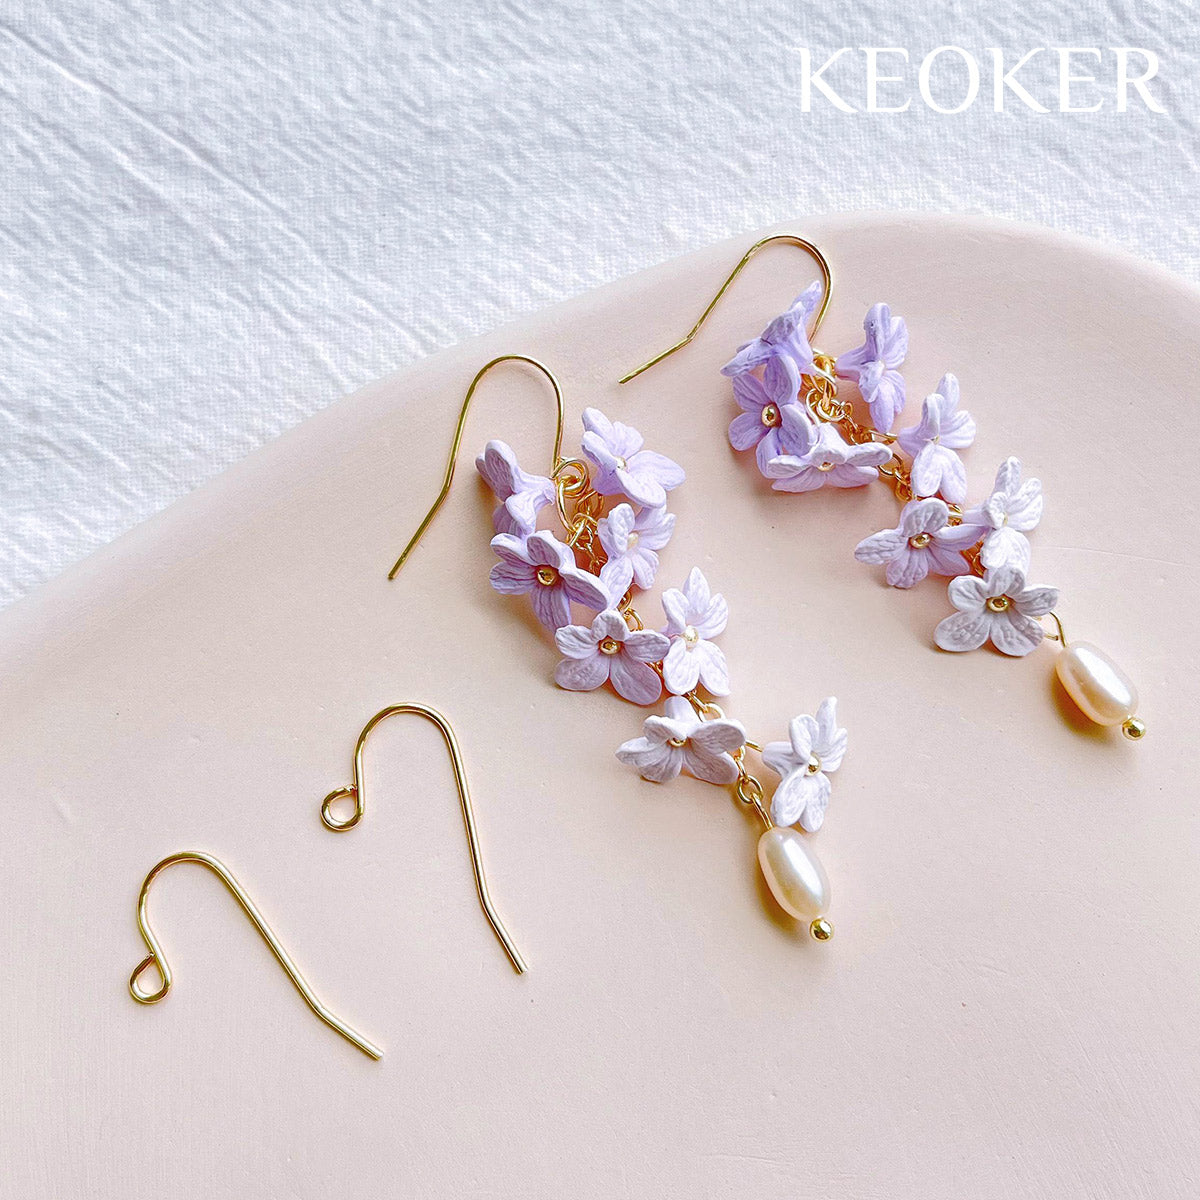 Keoker Bell Orchid Polymer Clay Earrings Molds